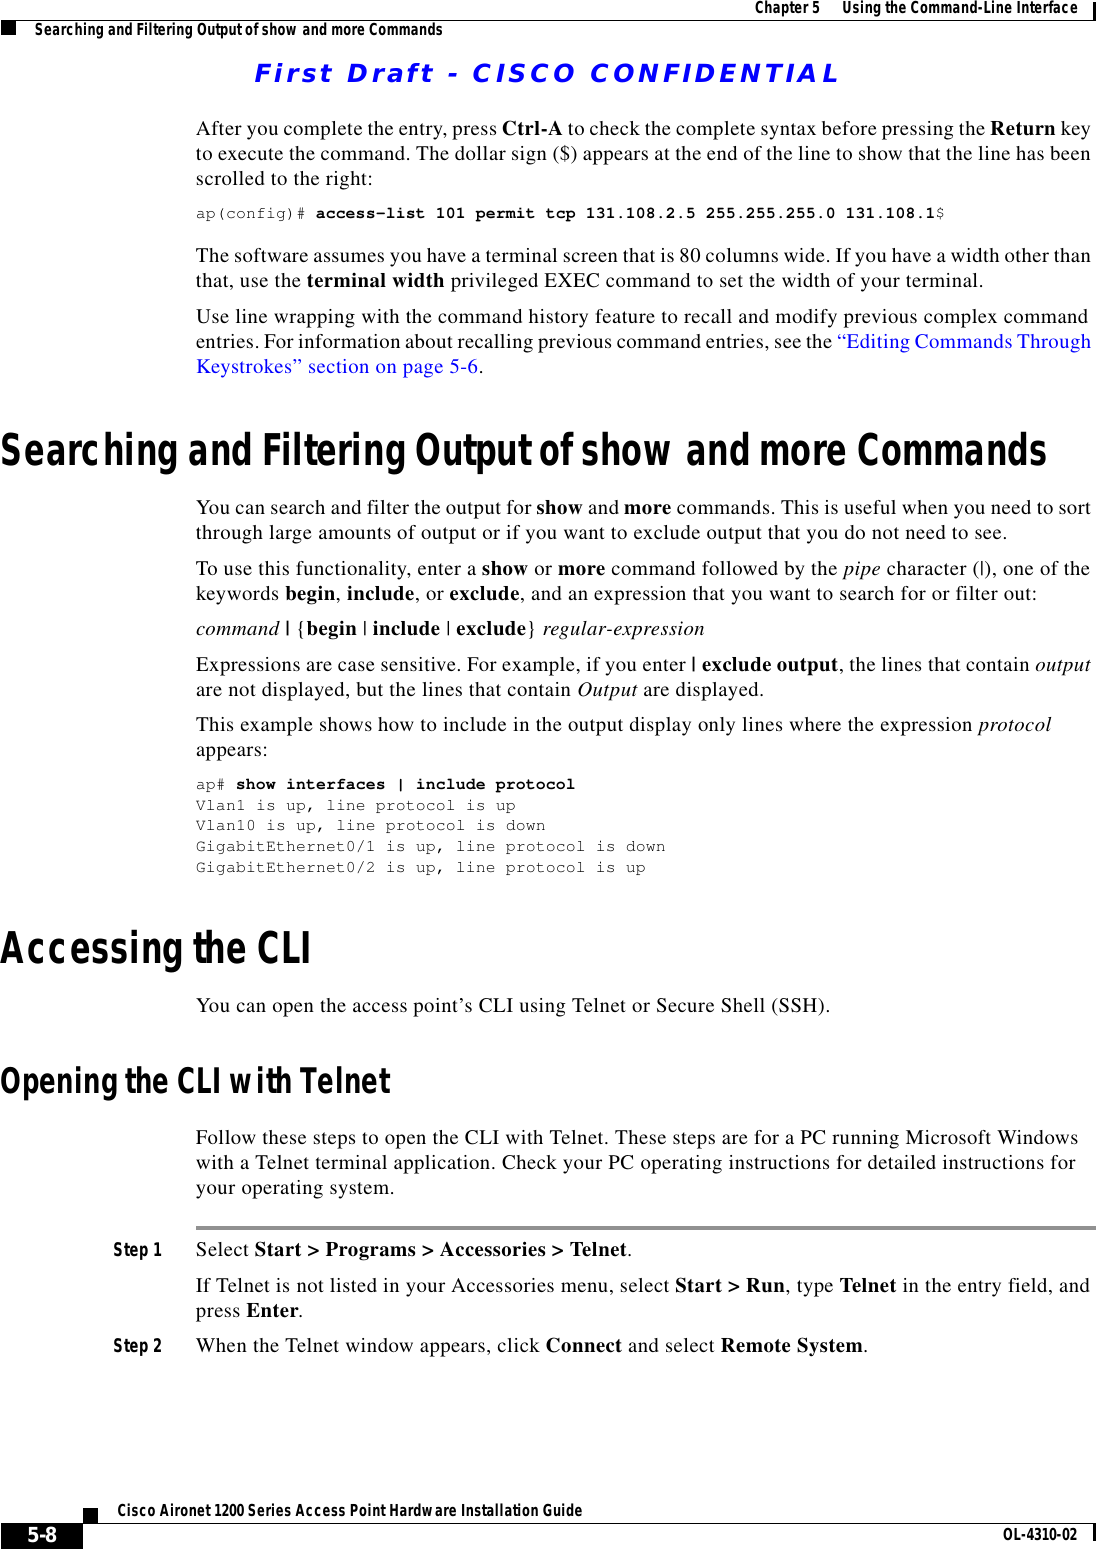 First Draft - CISCO CONFIDENTIAL5-8Cisco Aironet 1200 Series Access Point Hardware Installation Guide OL-4310-02Chapter 5      Using the Command-Line InterfaceSearching and Filtering Output of show and more CommandsAfter you complete the entry, press Ctrl-A to check the complete syntax before pressing the Return key to execute the command. The dollar sign ($) appears at the end of the line to show that the line has been scrolled to the right:ap(config)# access-list 101 permit tcp 131.108.2.5 255.255.255.0 131.108.1$The software assumes you have a terminal screen that is 80 columns wide. If you have a width other than that, use the terminal width privileged EXEC command to set the width of your terminal.Use line wrapping with the command history feature to recall and modify previous complex command entries. For information about recalling previous command entries, see the “Editing Commands Through Keystrokes” section on page 5-6.Searching and Filtering Output of show and more CommandsYou can search and filter the output for show and more commands. This is useful when you need to sort through large amounts of output or if you want to exclude output that you do not need to see.To use this functionality, enter a show or more command followed by the pipe character (|), one of the keywords begin, include, or exclude, and an expression that you want to search for or filter out:command | {begin | include | exclude} regular-expressionExpressions are case sensitive. For example, if you enter | exclude output, the lines that contain output are not displayed, but the lines that contain Output are displayed.This example shows how to include in the output display only lines where the expression protocol appears:ap# show interfaces | include protocolVlan1 is up, line protocol is upVlan10 is up, line protocol is downGigabitEthernet0/1 is up, line protocol is downGigabitEthernet0/2 is up, line protocol is up Accessing the CLIYou can open the access point’s CLI using Telnet or Secure Shell (SSH). Opening the CLI with TelnetFollow these steps to open the CLI with Telnet. These steps are for a PC running Microsoft Windows with a Telnet terminal application. Check your PC operating instructions for detailed instructions for your operating system.Step 1 Select Start &gt; Programs &gt; Accessories &gt; Telnet. If Telnet is not listed in your Accessories menu, select Start &gt; Run, type Telnet in the entry field, and press Enter. Step 2 When the Telnet window appears, click Connect and select Remote System.